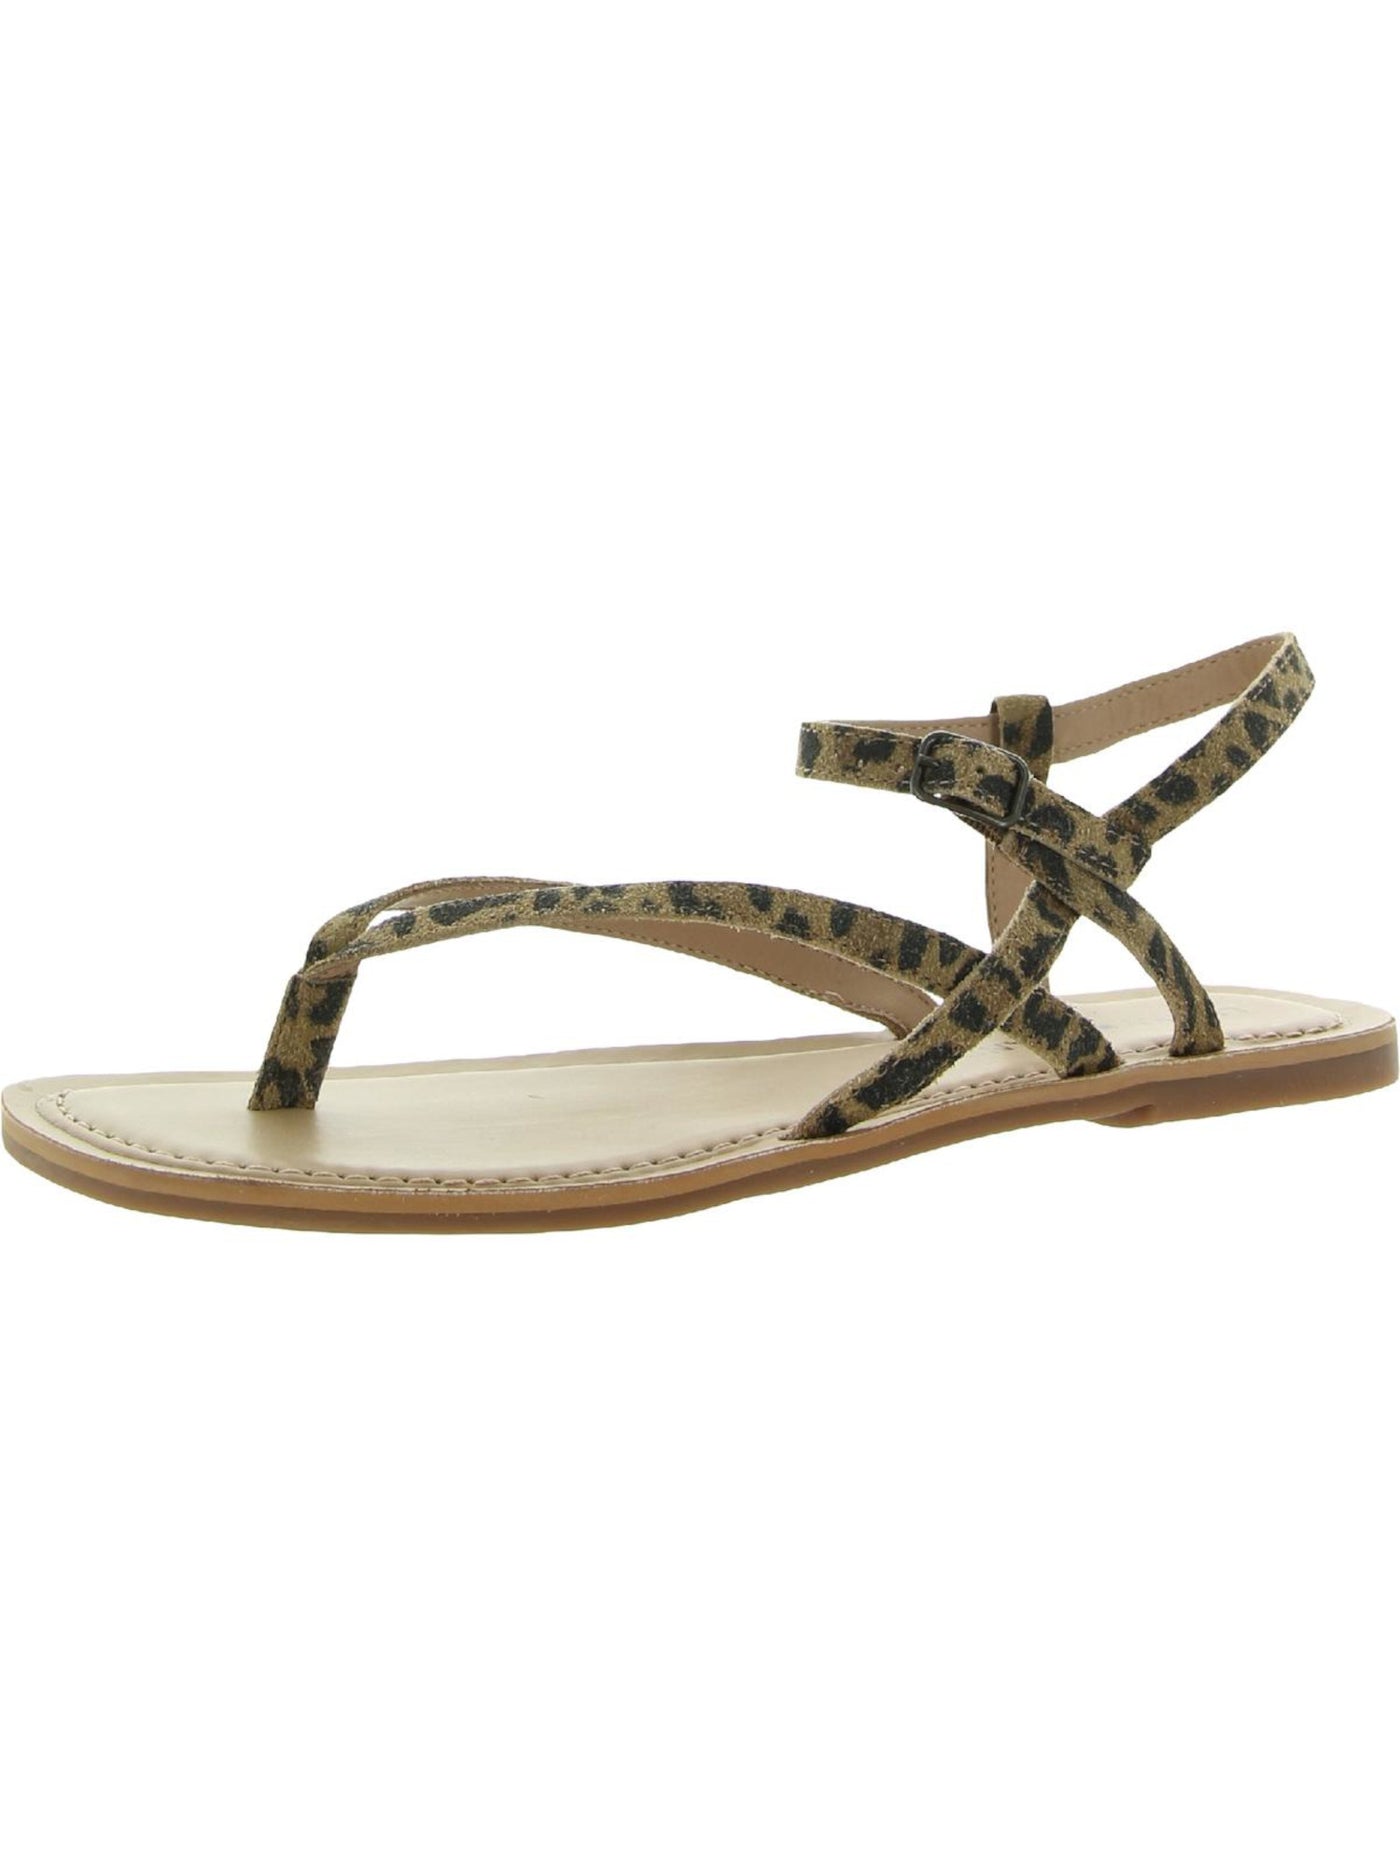 LUCKY BRAND Womens Beige Animal Print Leopard Ankle Strap Comfort Bylee Square Toe Buckle Leather Thong Sandals Shoes 8 M